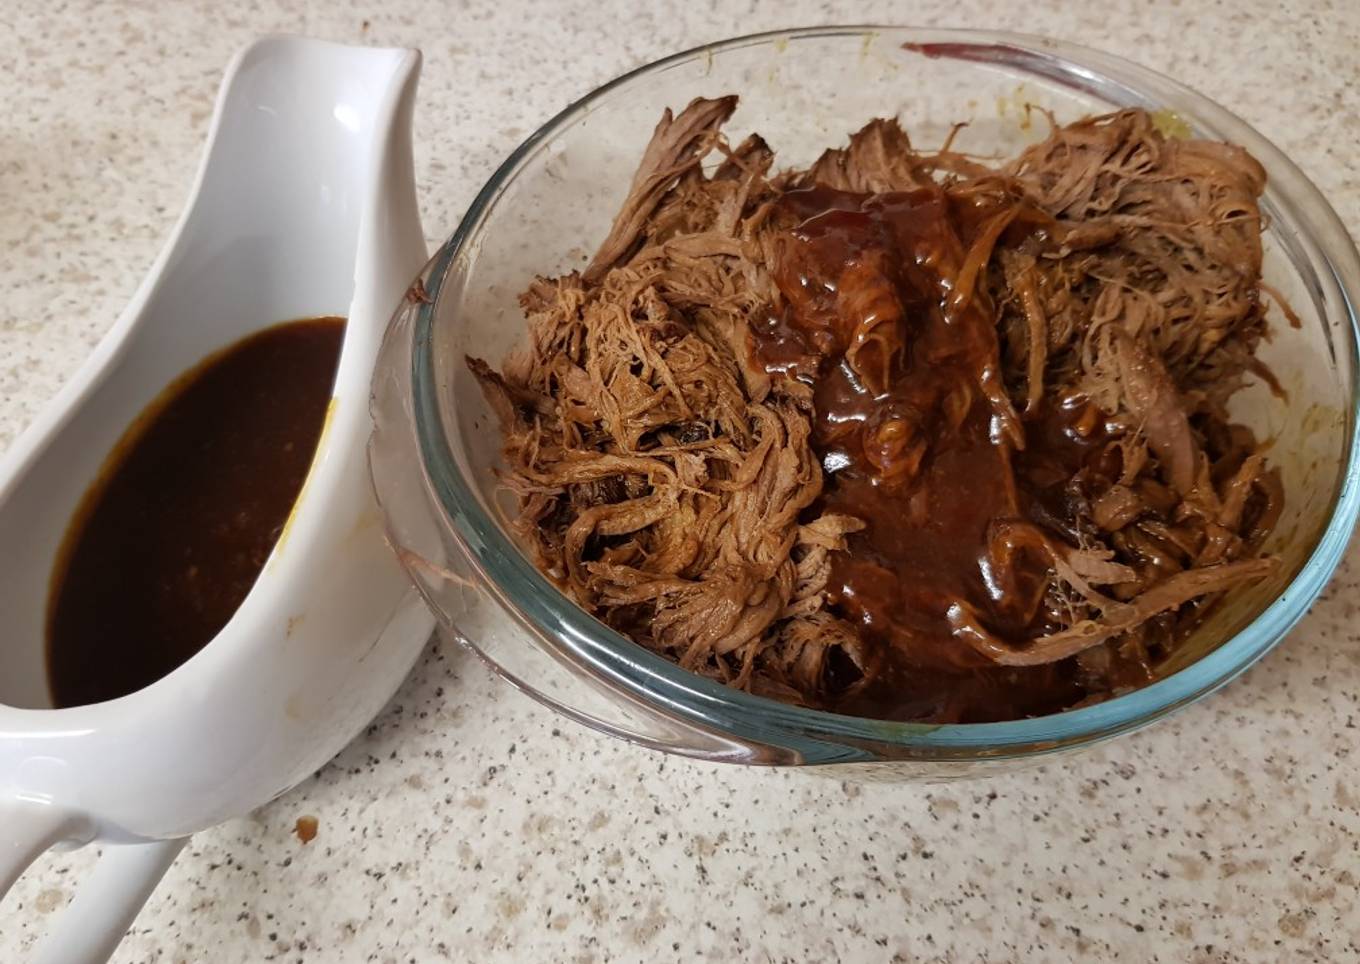 My Slow BBQ Pulled Beef. 😁